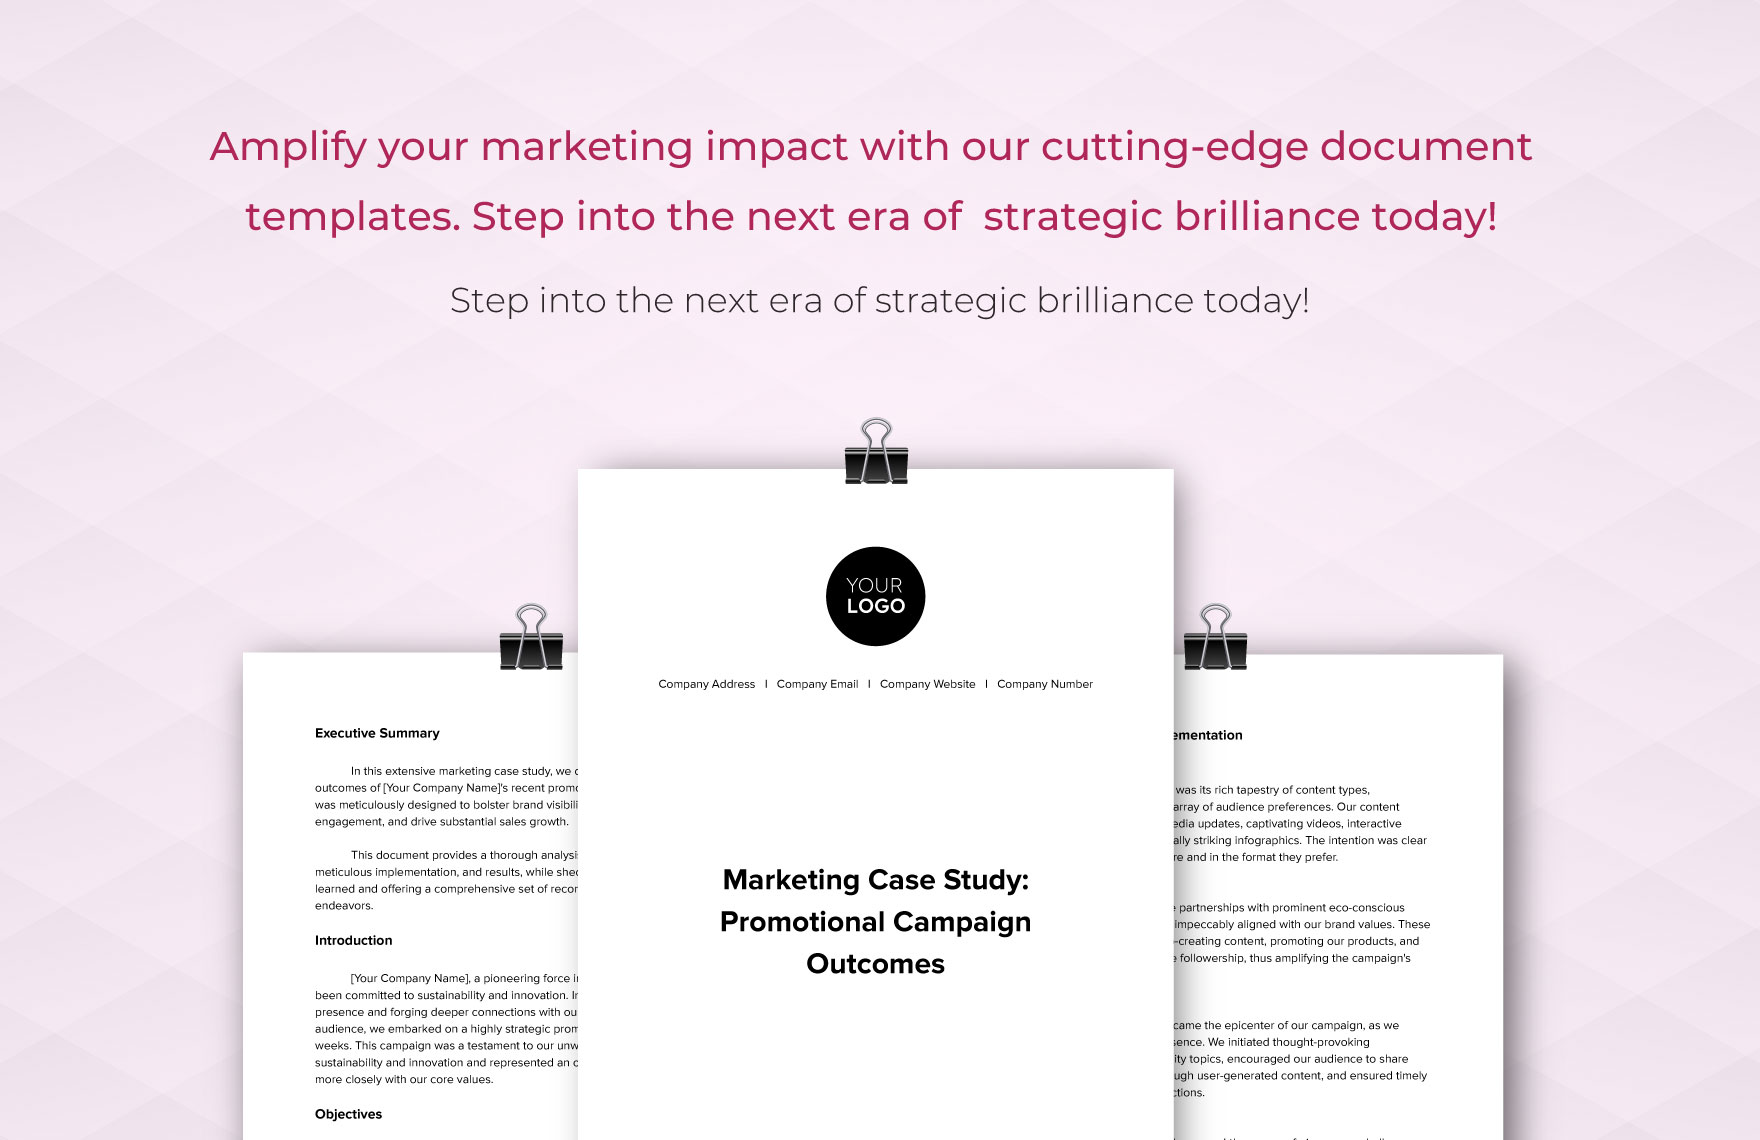 Marketing Case Study on Promotional Campaign Outcomes Template